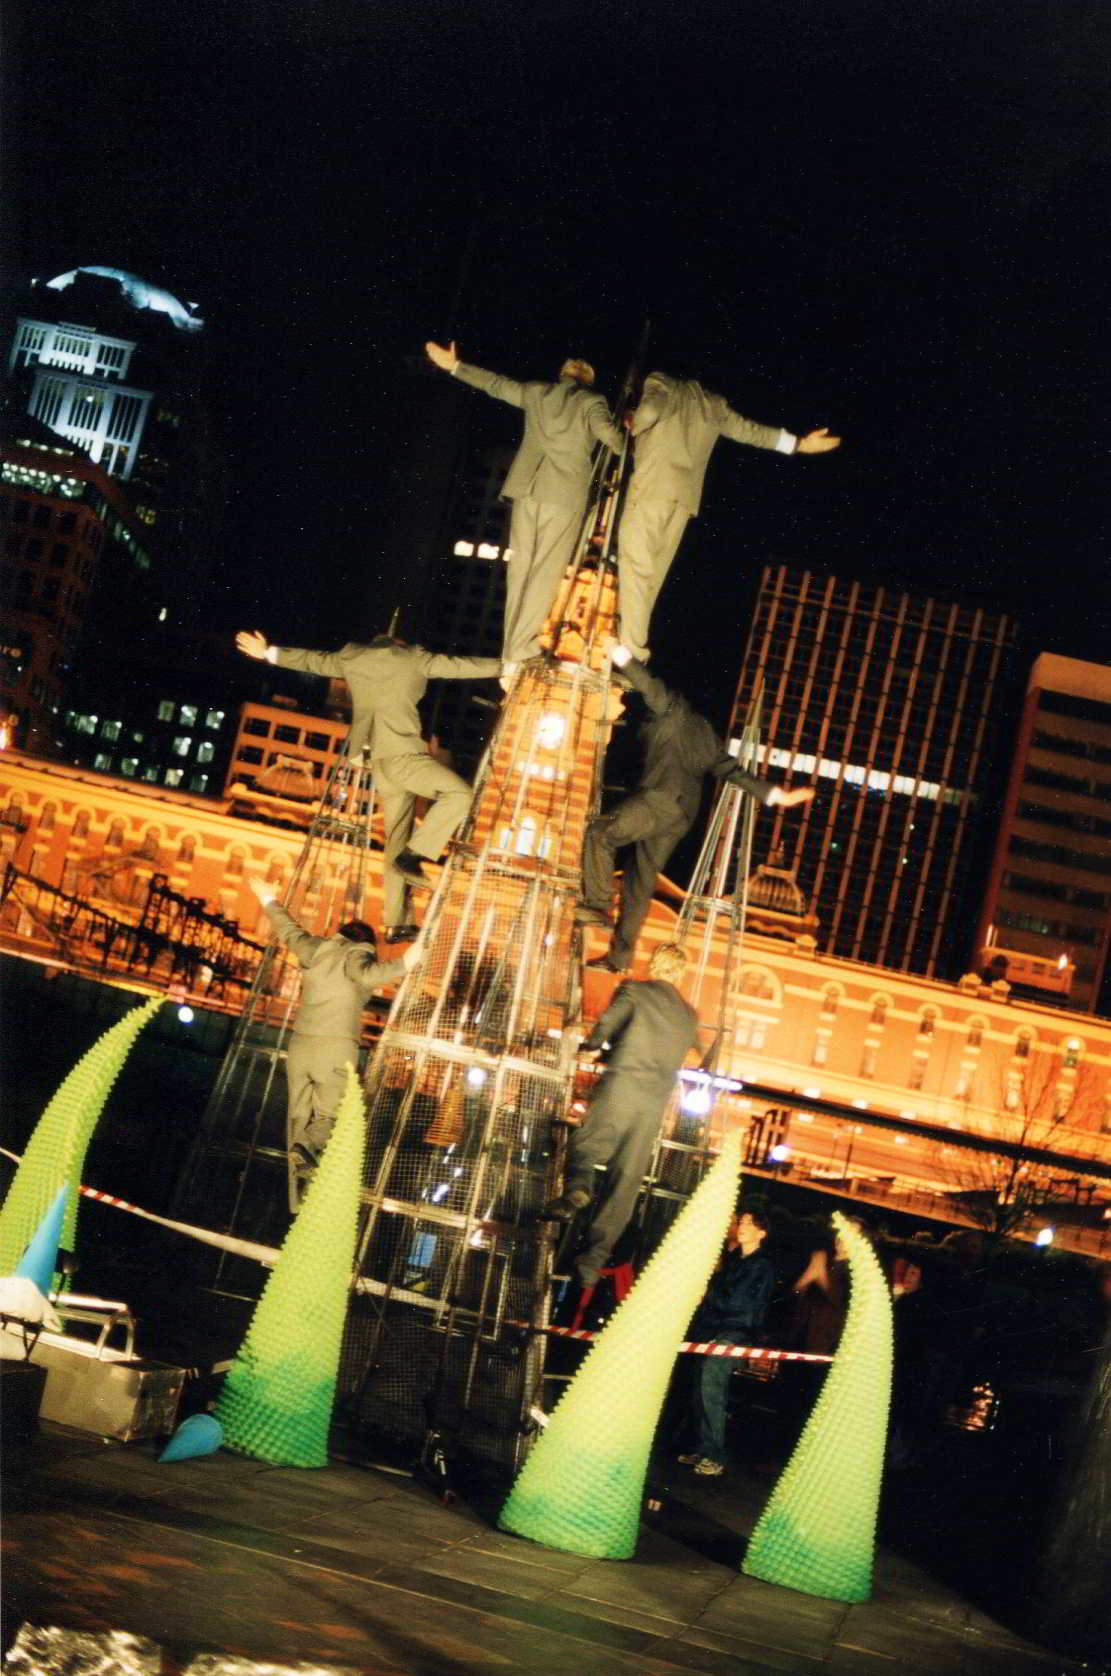 Cone Project Handspan Visual Theatre back view of acrobats at night in a 3-high tower in front of city buildings